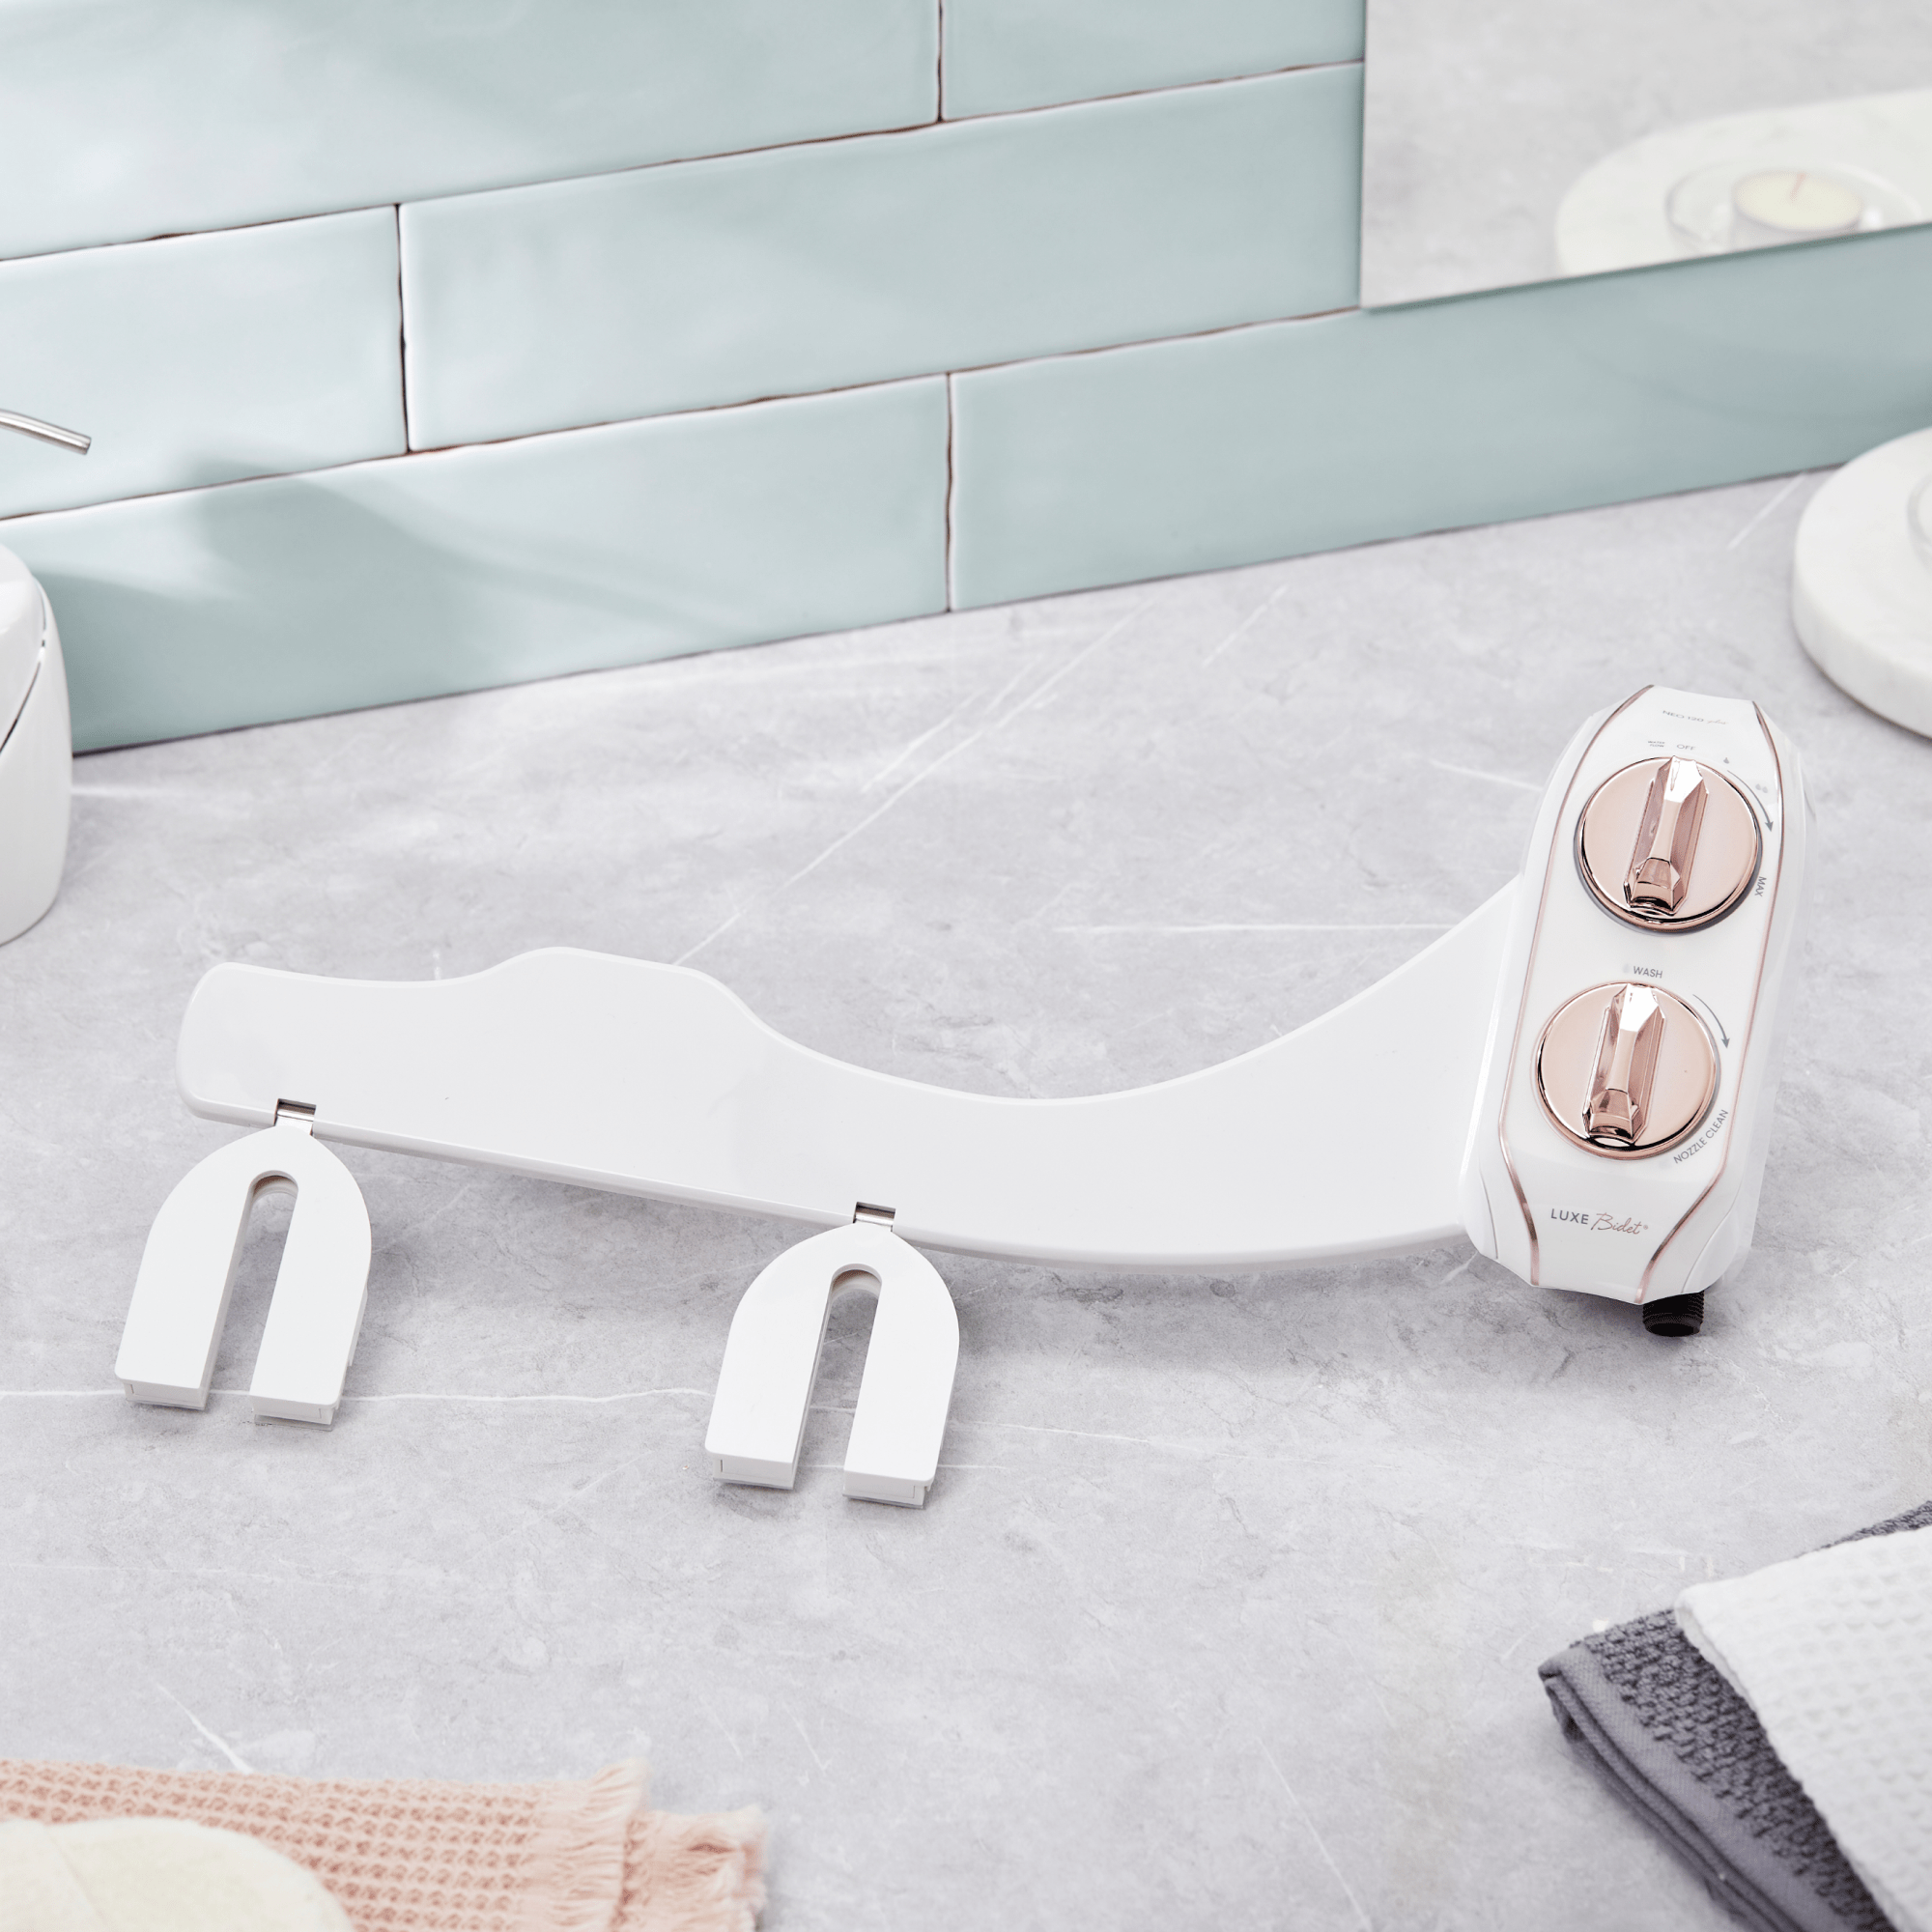 NEO 120 Plus: Imperfect Packaging - NEO 120 Plus Rose Gold propped up to see entire bidet body